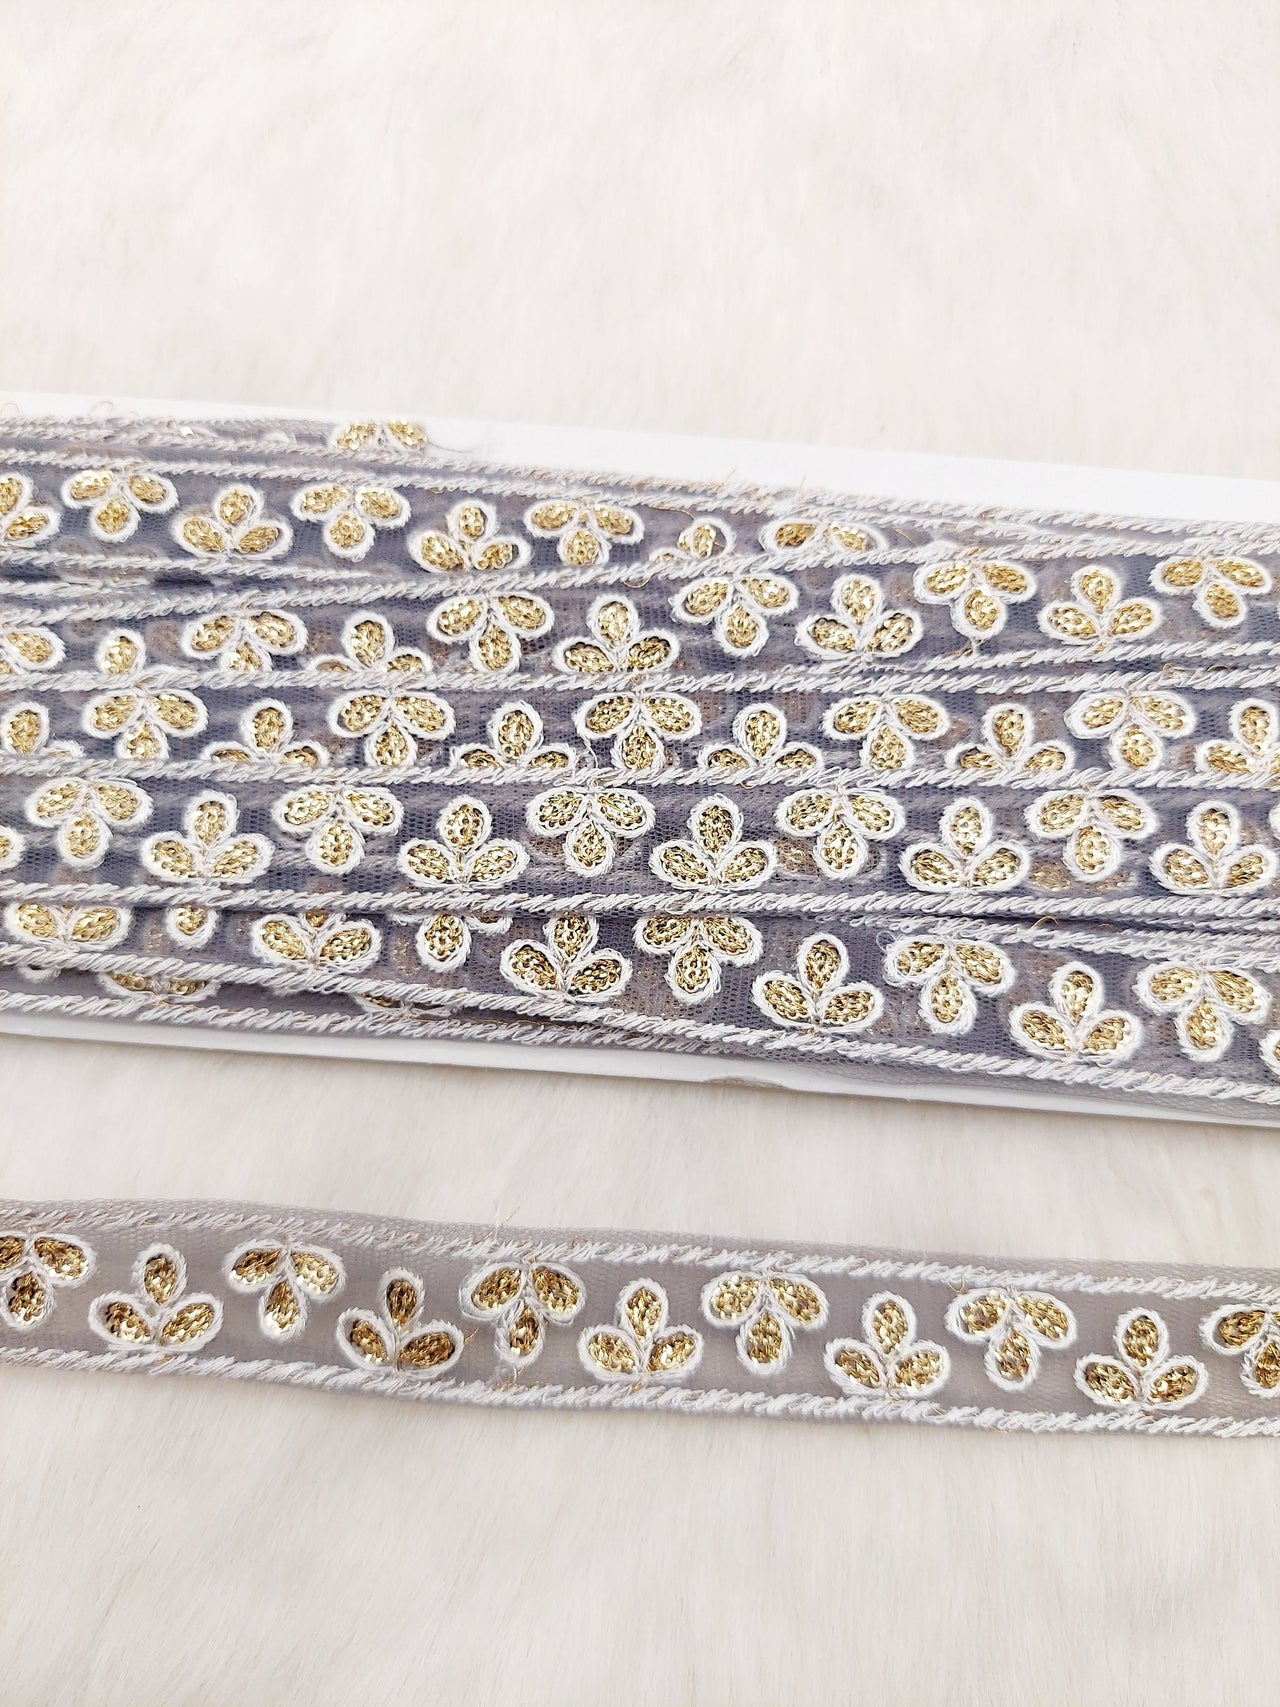 Wholesale Grey Net Lace Floral Embroidery & Glitter Gold Sequins, Indian Wedding Border, Gifting Ribbon Costume Trim Fashion Trimming